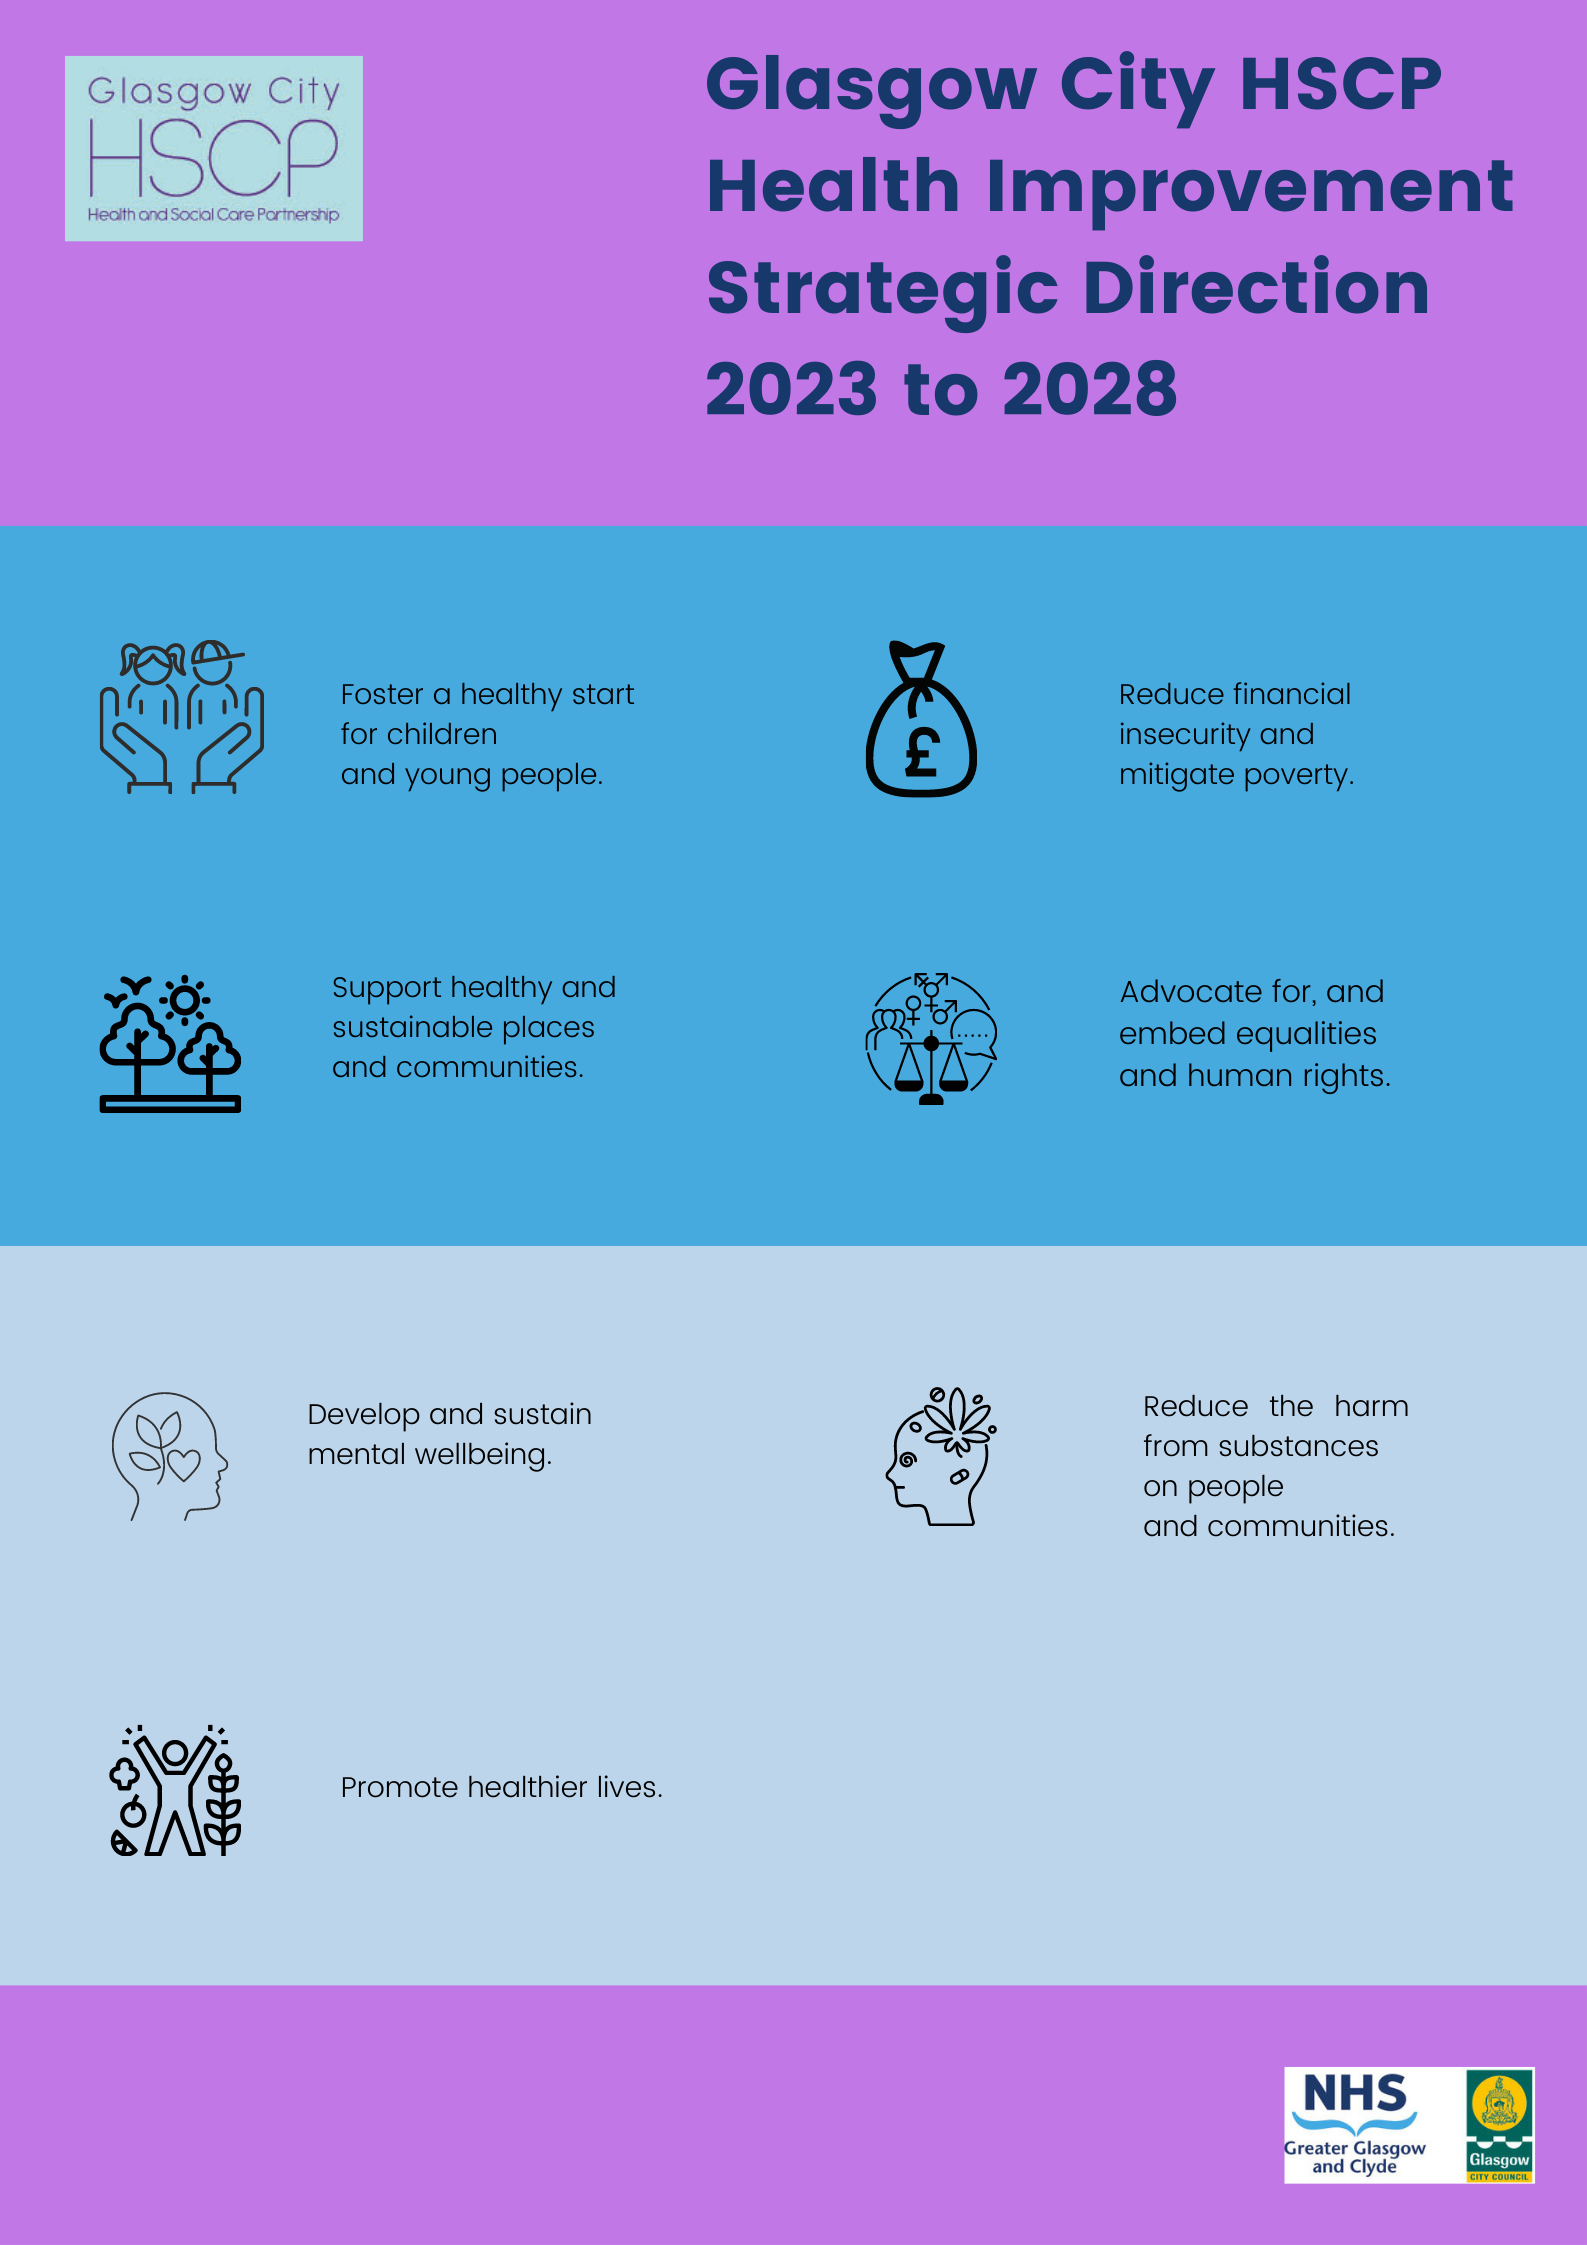 This infographic reads  Glasgow City HSCP Health Improvement Strategic Direction  2023 to 2028   Foster a healthy start for children and young people. Reduce financial insecurity and mitigate poverty. Support healthy and sustainable places and community.  Advocate for, and embed equalities and human rights.  Develop and sustain mental wellbeing.  Reduce the harm from substances on people and communities. Promote healthier lives.